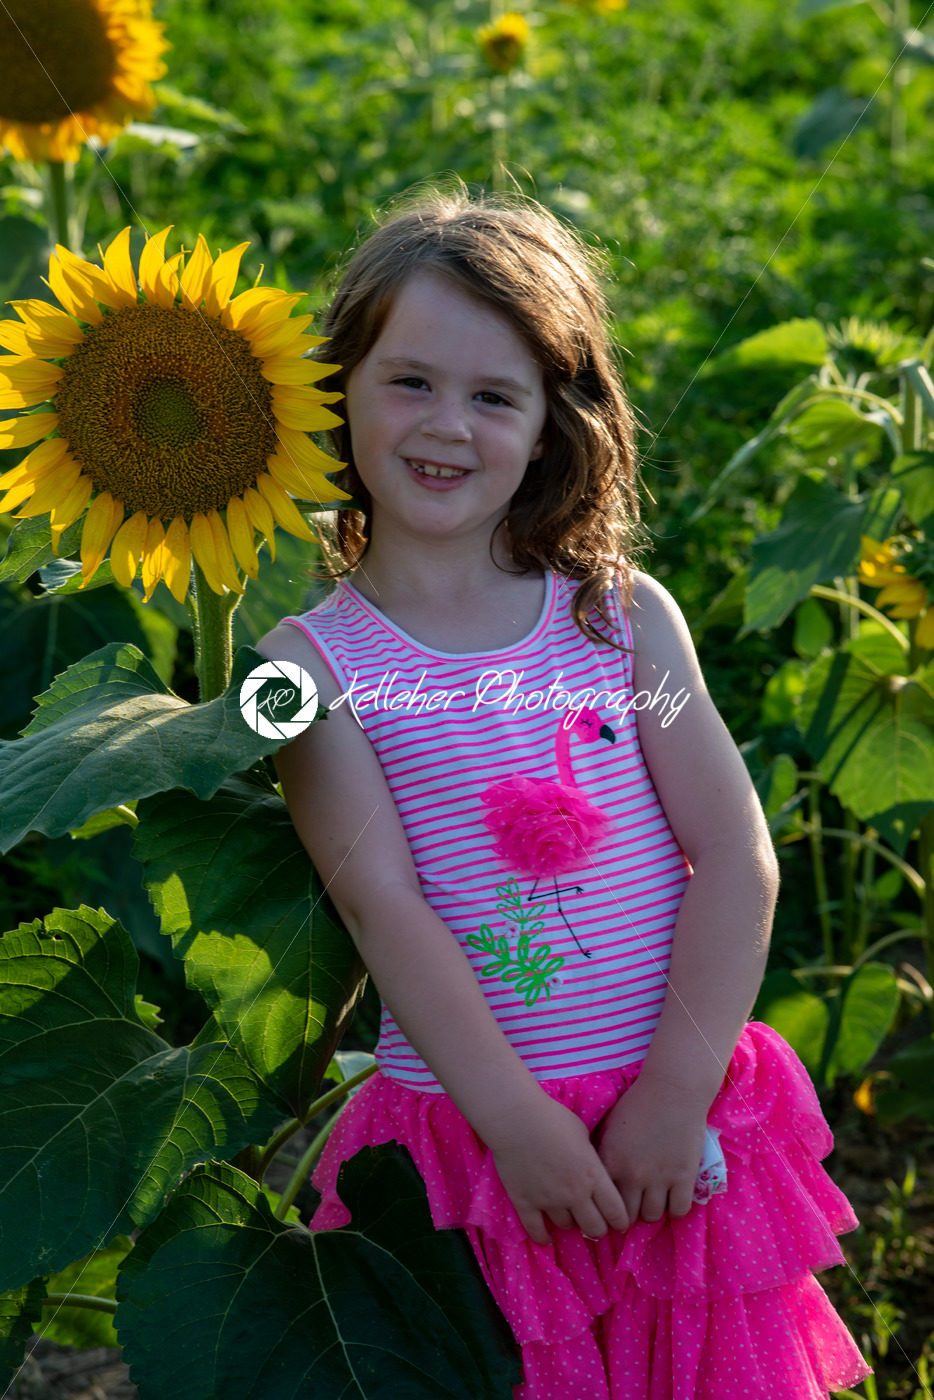 Beauty joyful young girl with sunflower enjoying nature and laughing on summer sunflower field. Sunflare, sunbeams, glow sun. Backlit. - Kelleher Photography Store